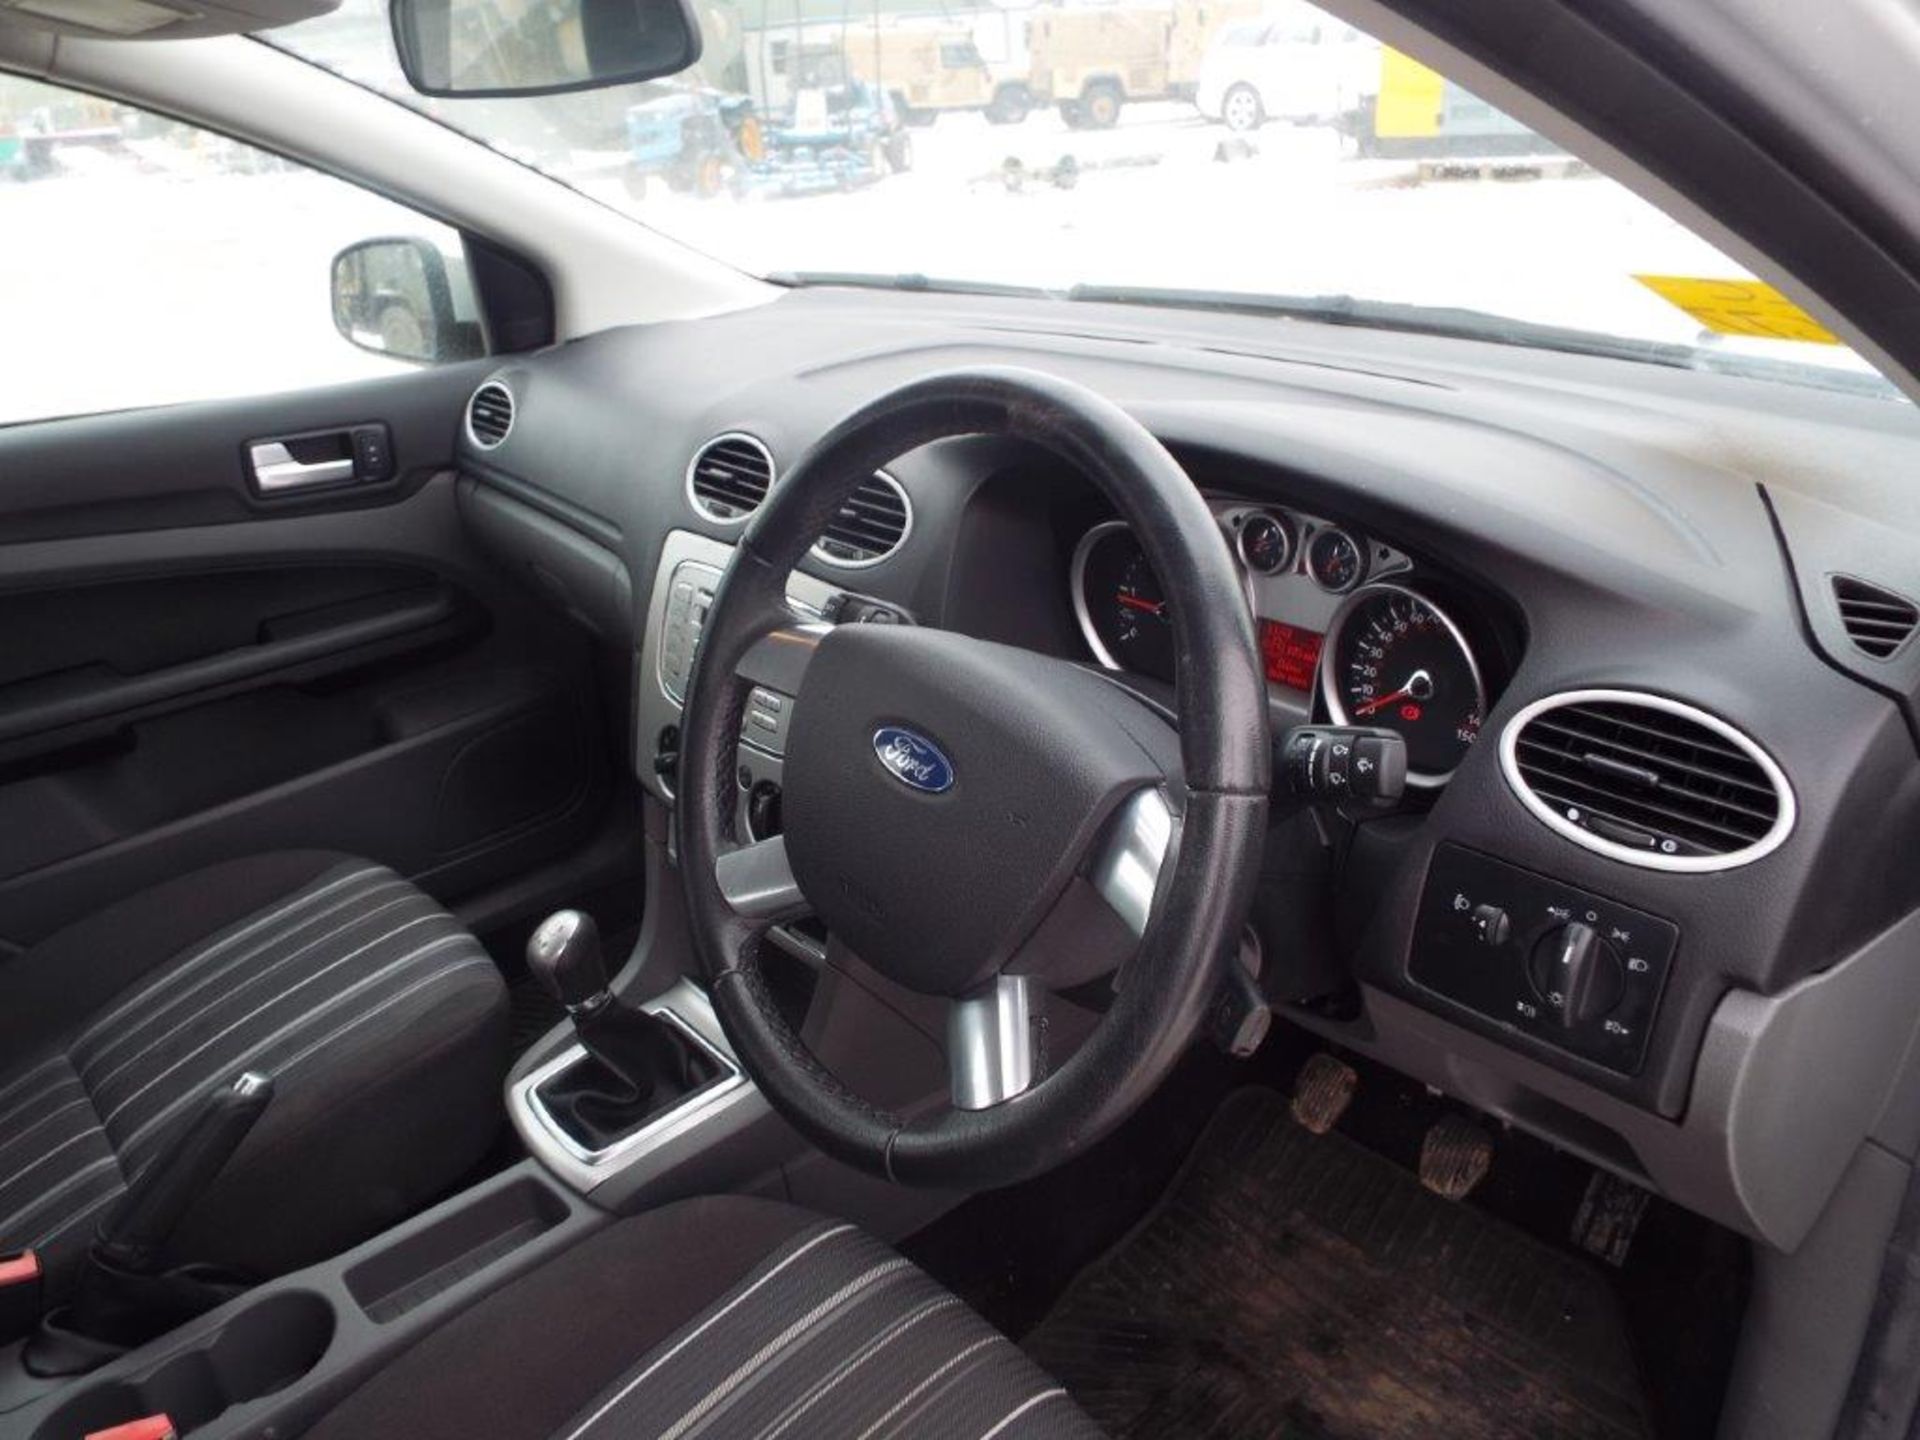 Ford Focus Style 1.8 TD 115 Estate - Only 25,174 Miles! - Image 12 of 21